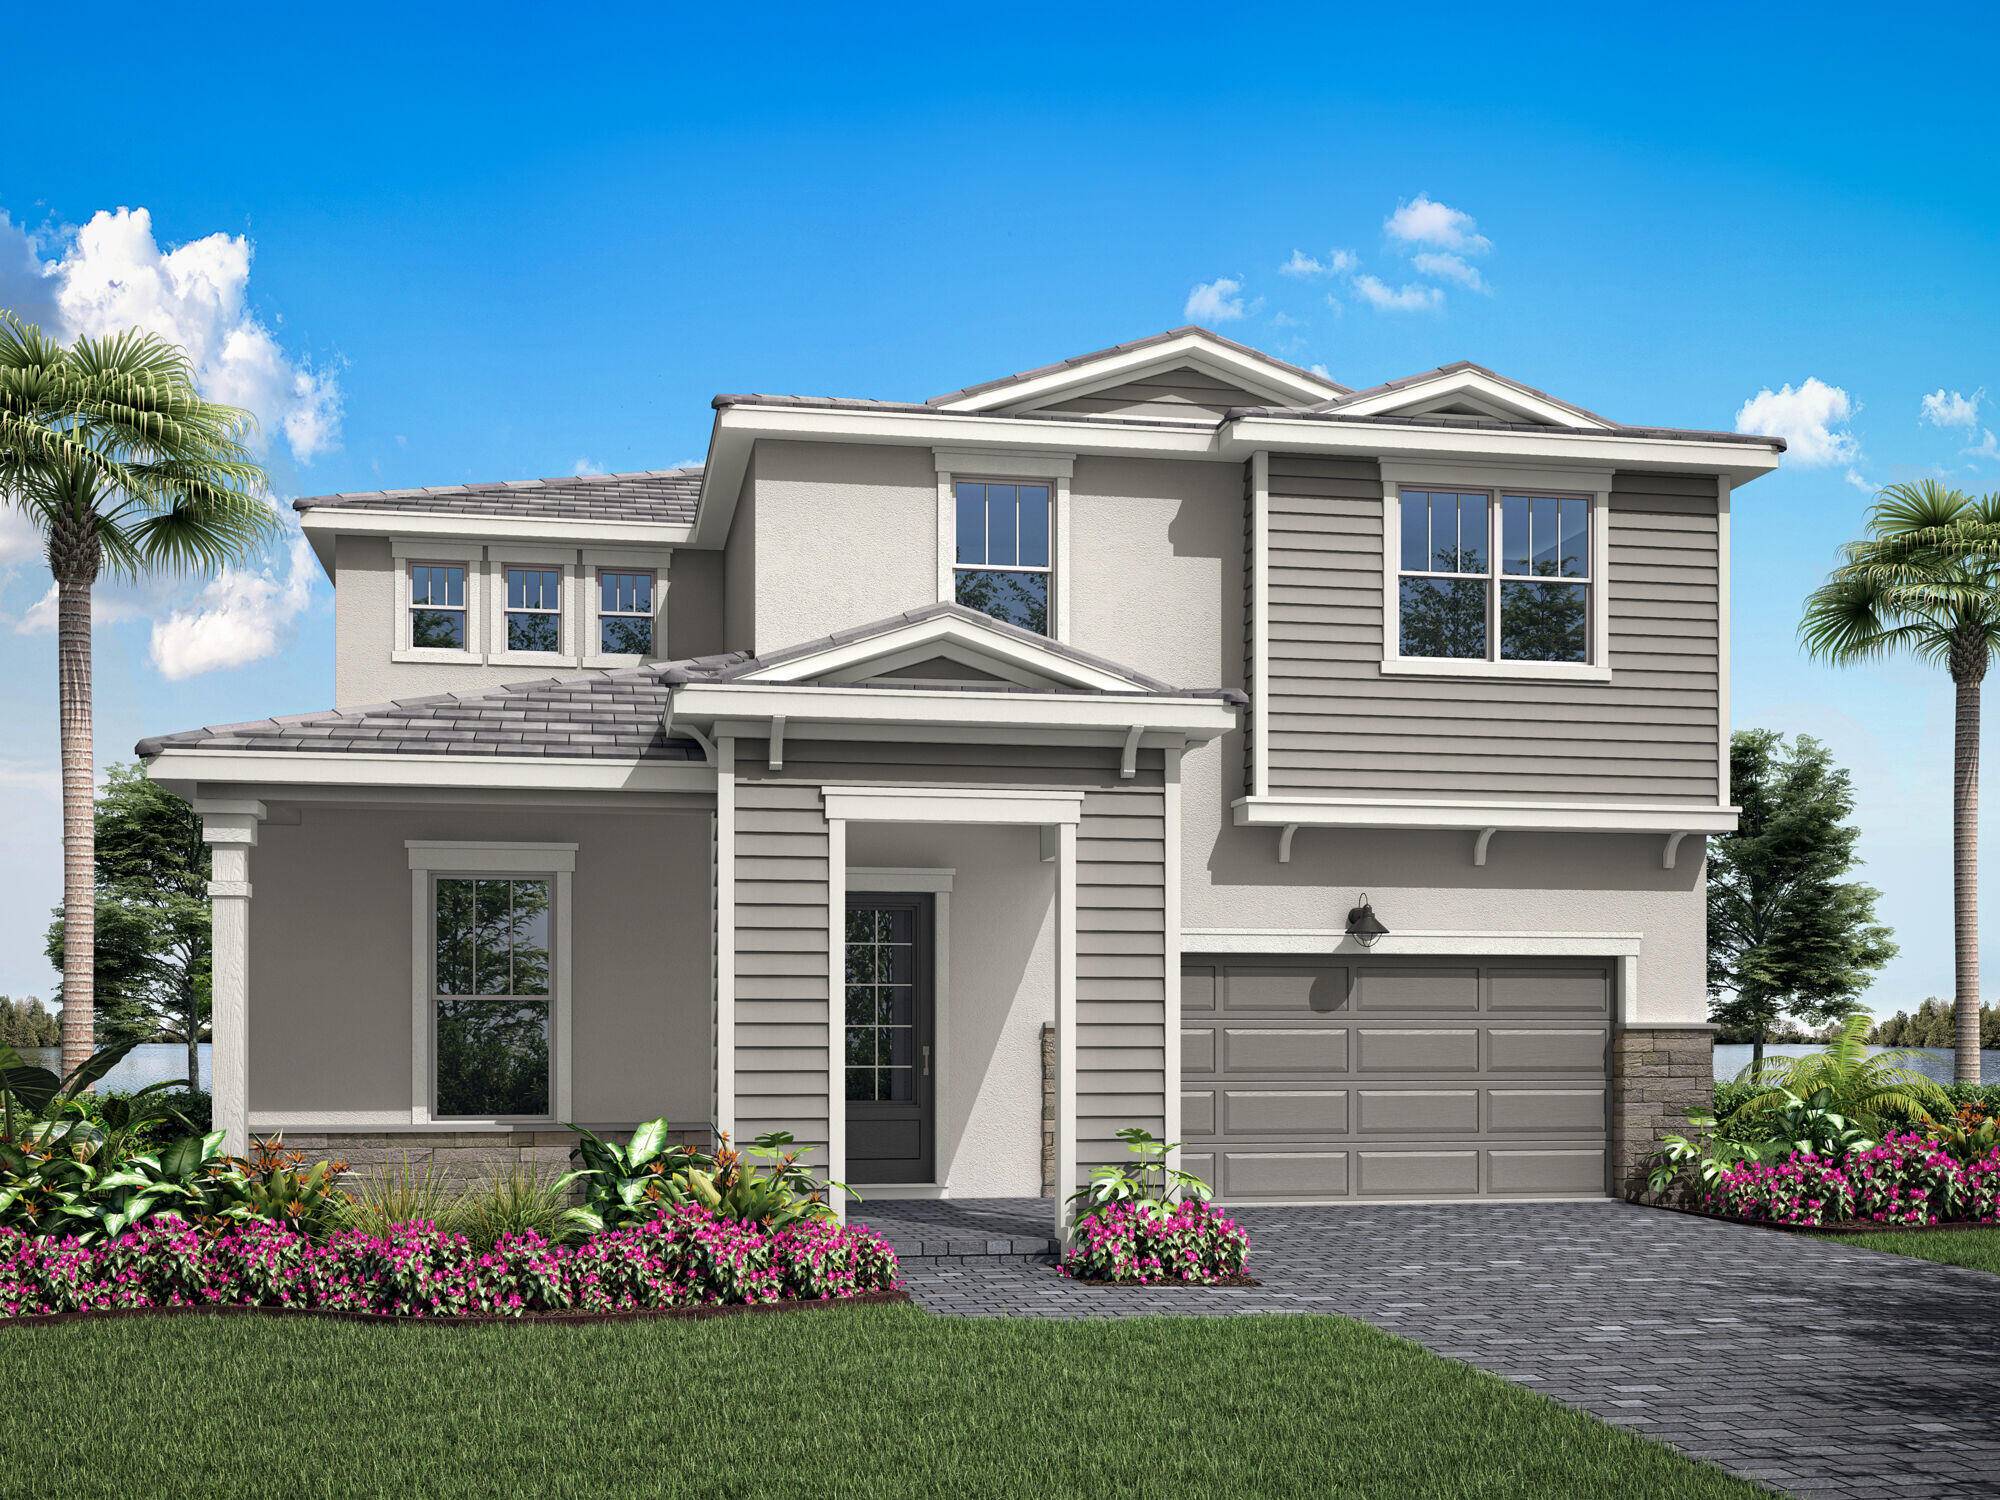 This 2, 585 sq. ft. Eau floorplan is 2 story home that offers 4 bedrooms, 3 baths and a 2 car garage.